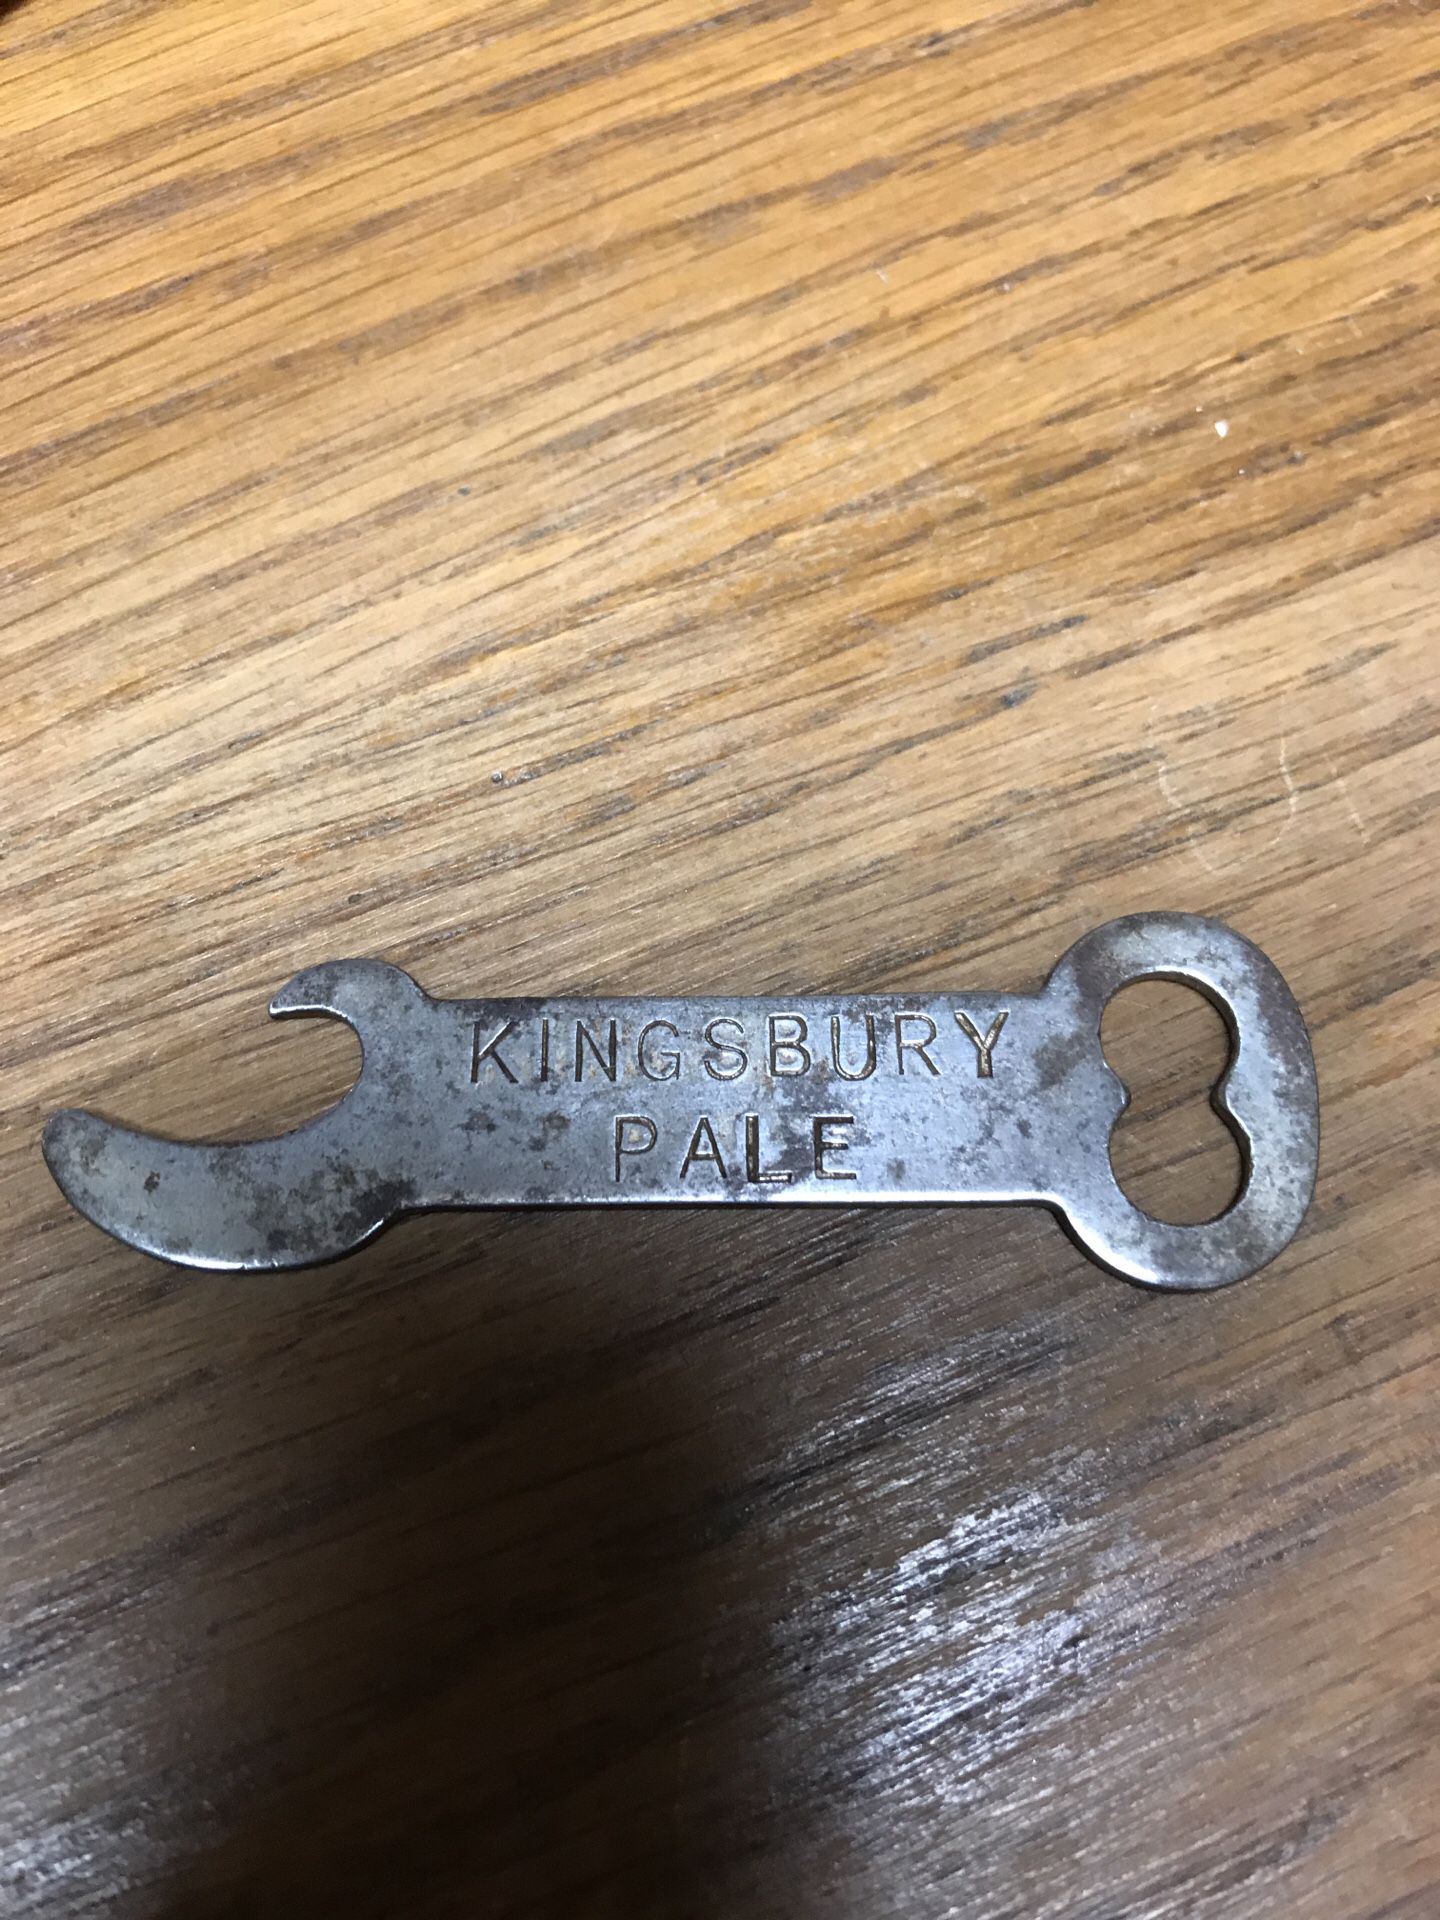 Old Flat bottle opener kingsbury Pale, Manitowac Products Co. Wis.